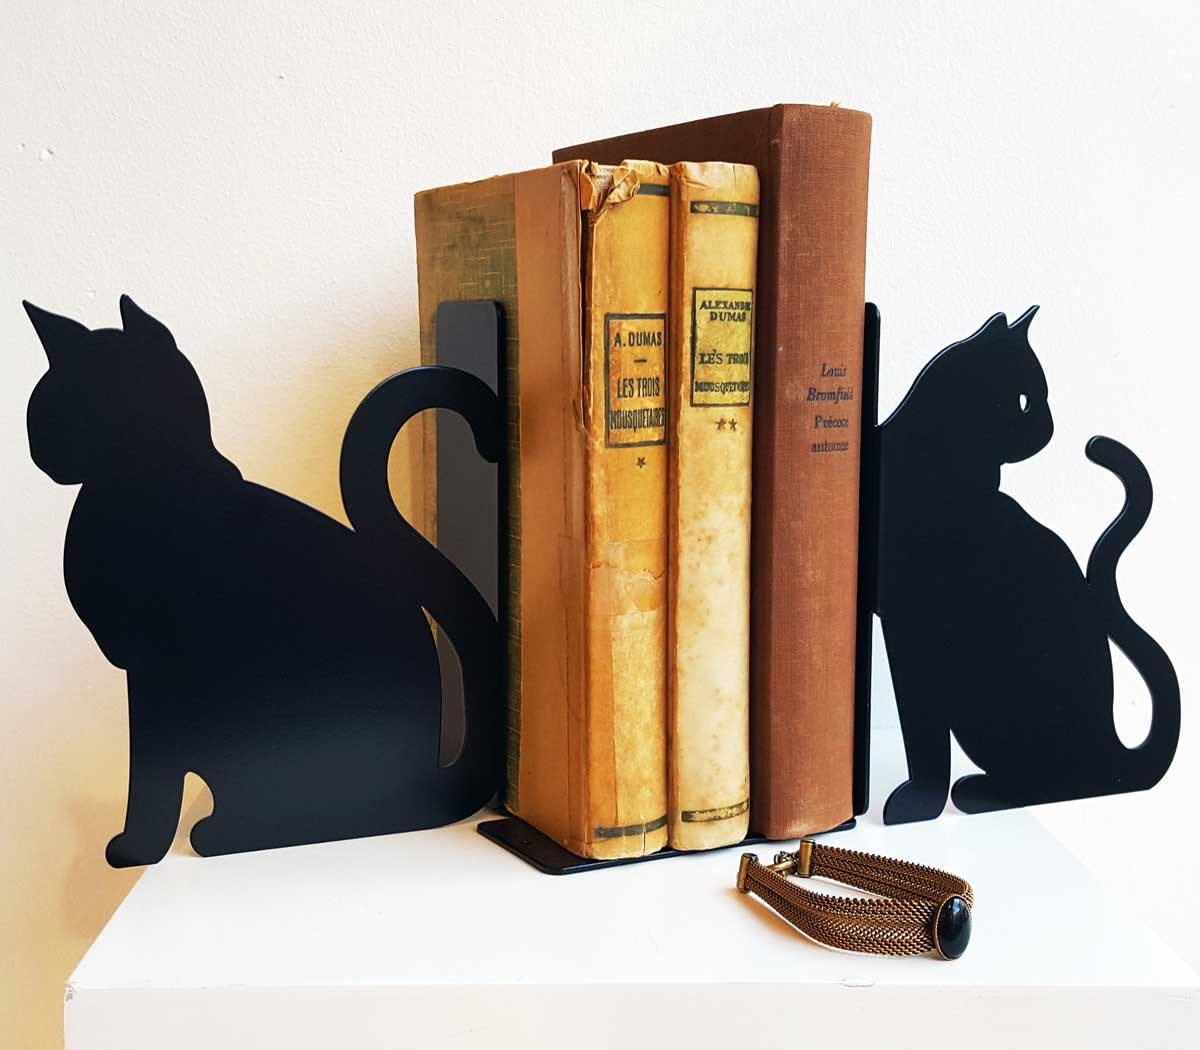 Cat and Dog Bookends Cute Shape Book Stand for School Office Desk Accessories Organizer Book Stand CD Rack Home Decorative Bookends 